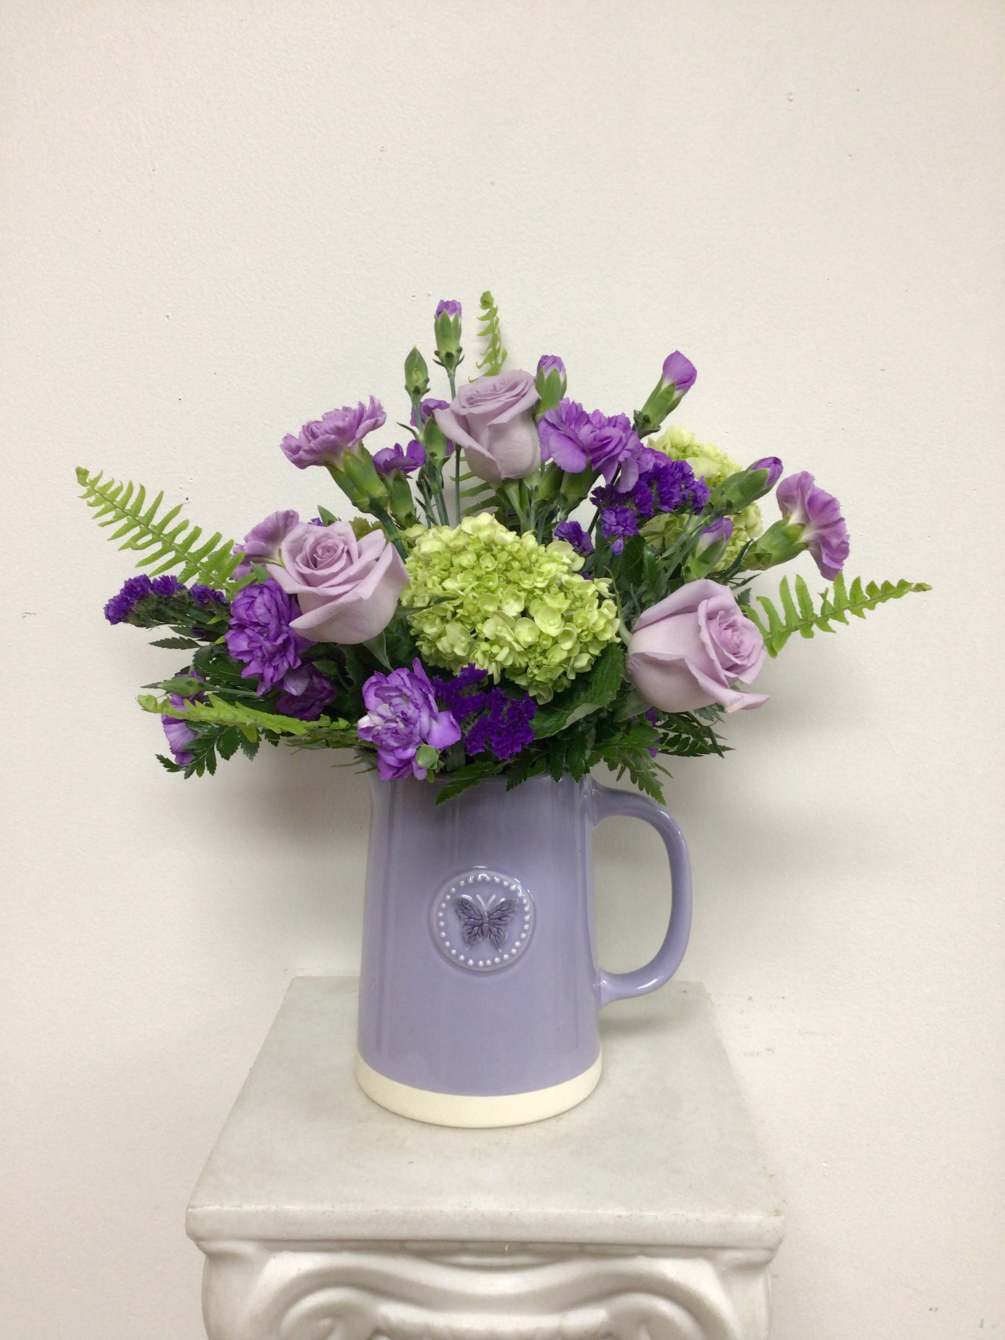 Ceramic lavender pitcher embossed with a butterfly and arranged with lavender miniature